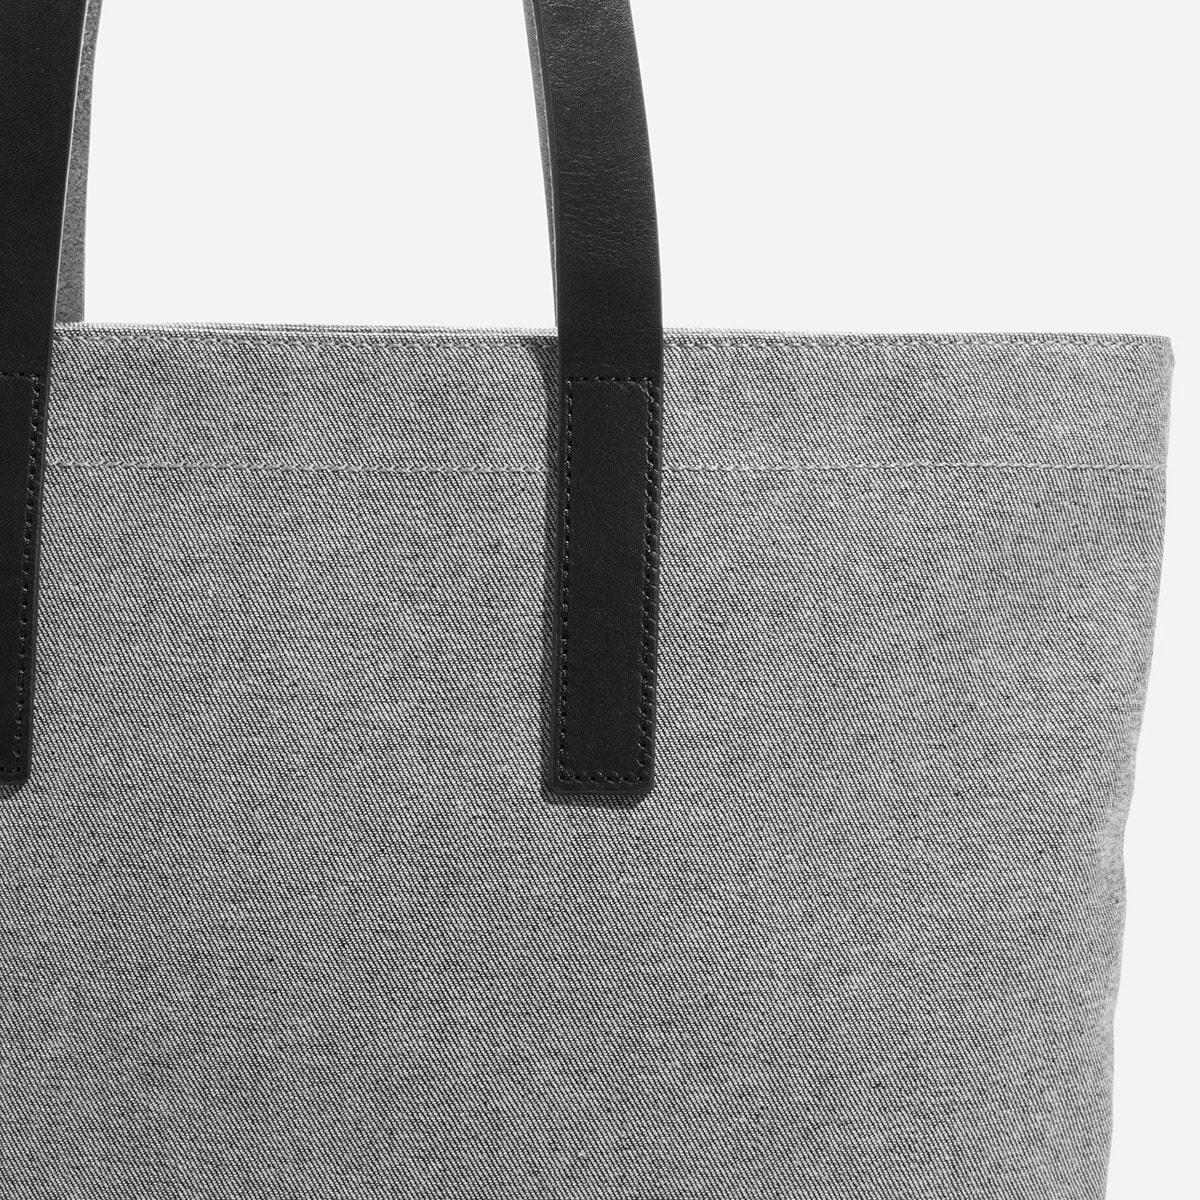 Everlane Twill Zip Tote & Pocket Tote Review - Welcome Objects